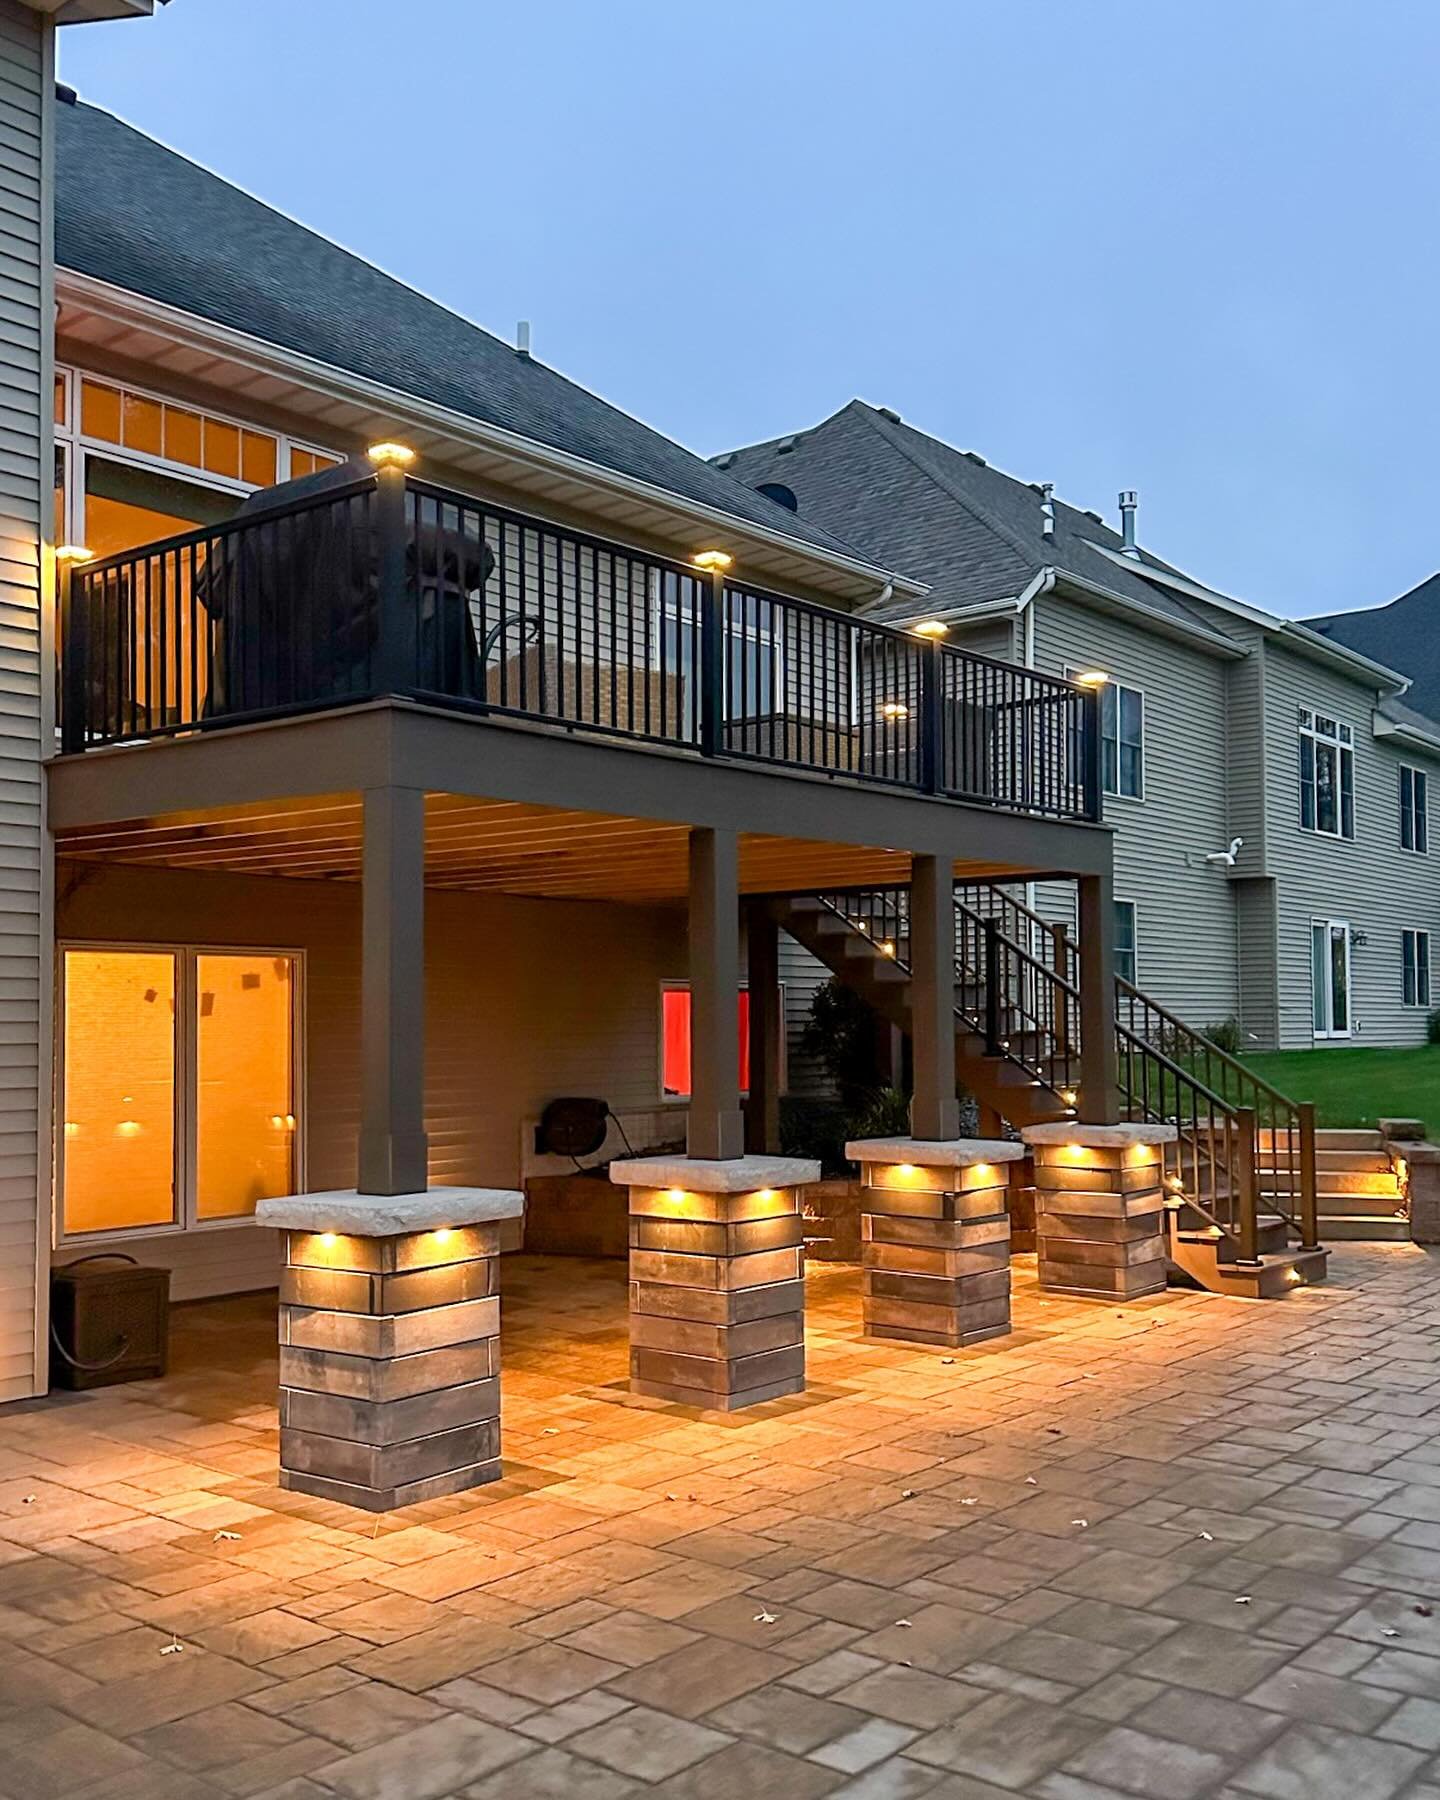 Looking to elevate your new (or existing!) deck? Ambient lighting is a simple way to kick it up a notch!

We offer a variety of lighting choices from in-rail lights to step-riser lights in solar and low-voltage power options!
.
.
.
#deck #maintenance